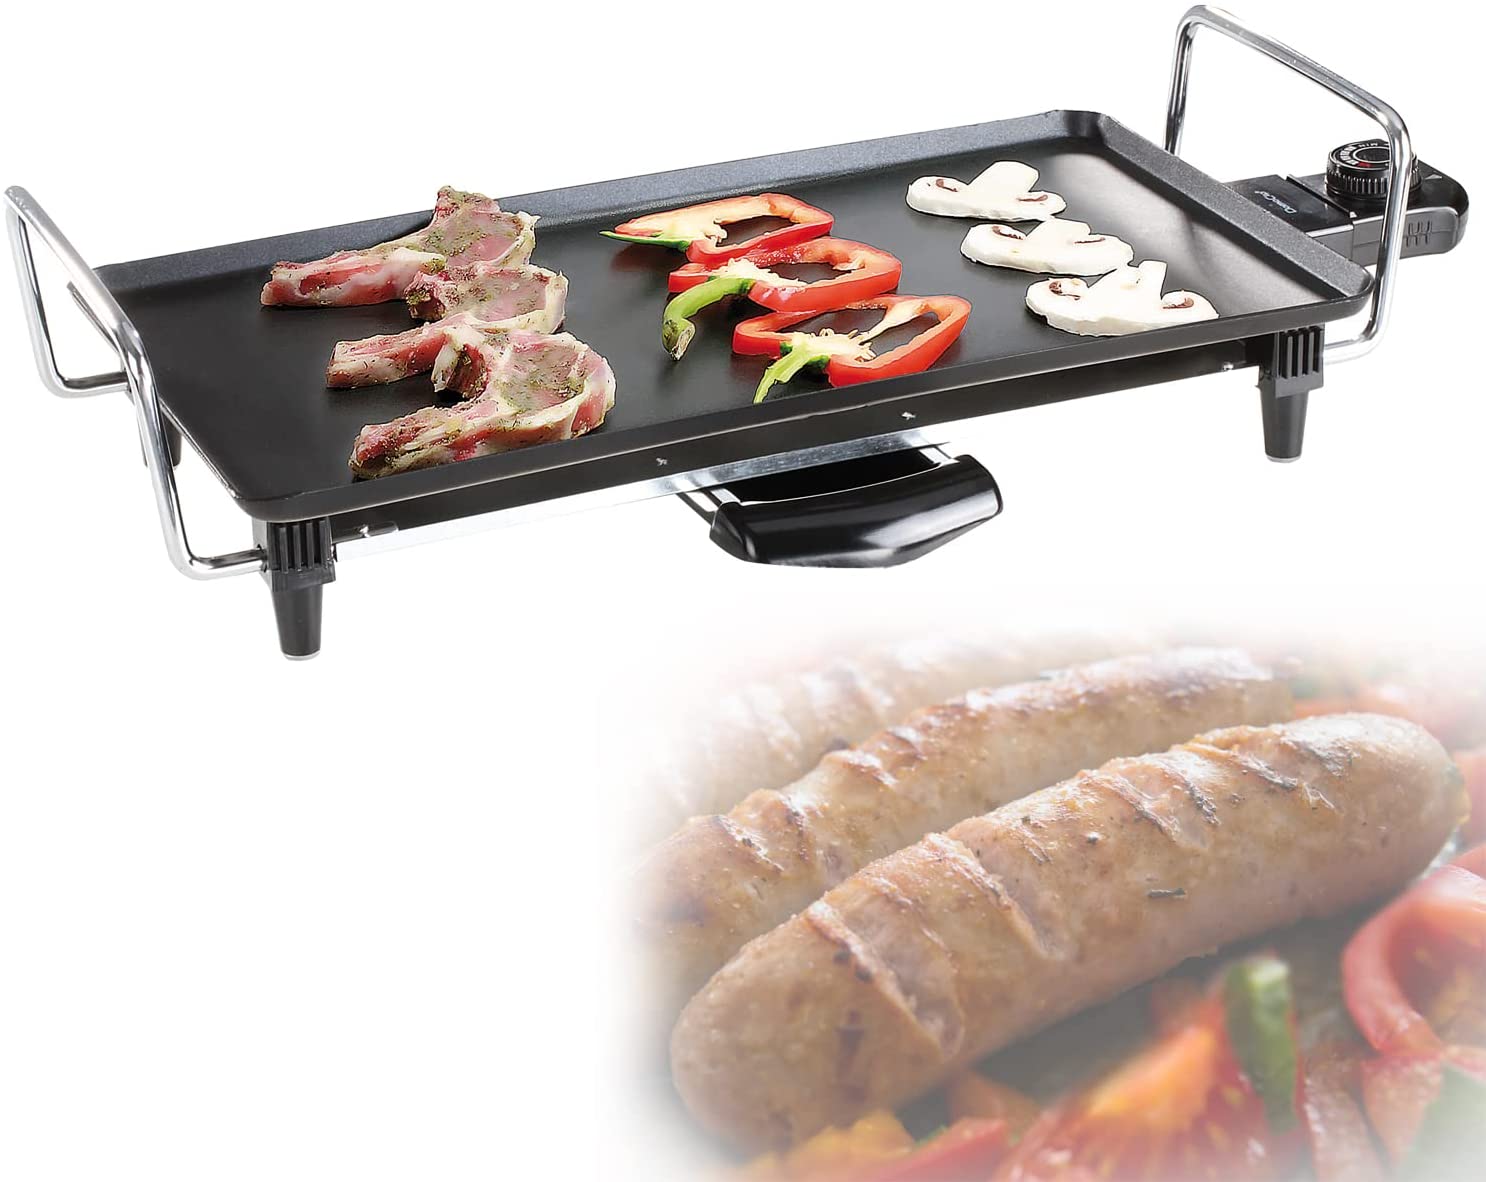 LIVOO Teppanyaki Grill with Strong 2000 Watt Electric Grill (Japanese Grill, Table Grill, Grease Collection Container, Grill Plate Approx. 40 x 23 cm, Easy to Clean)